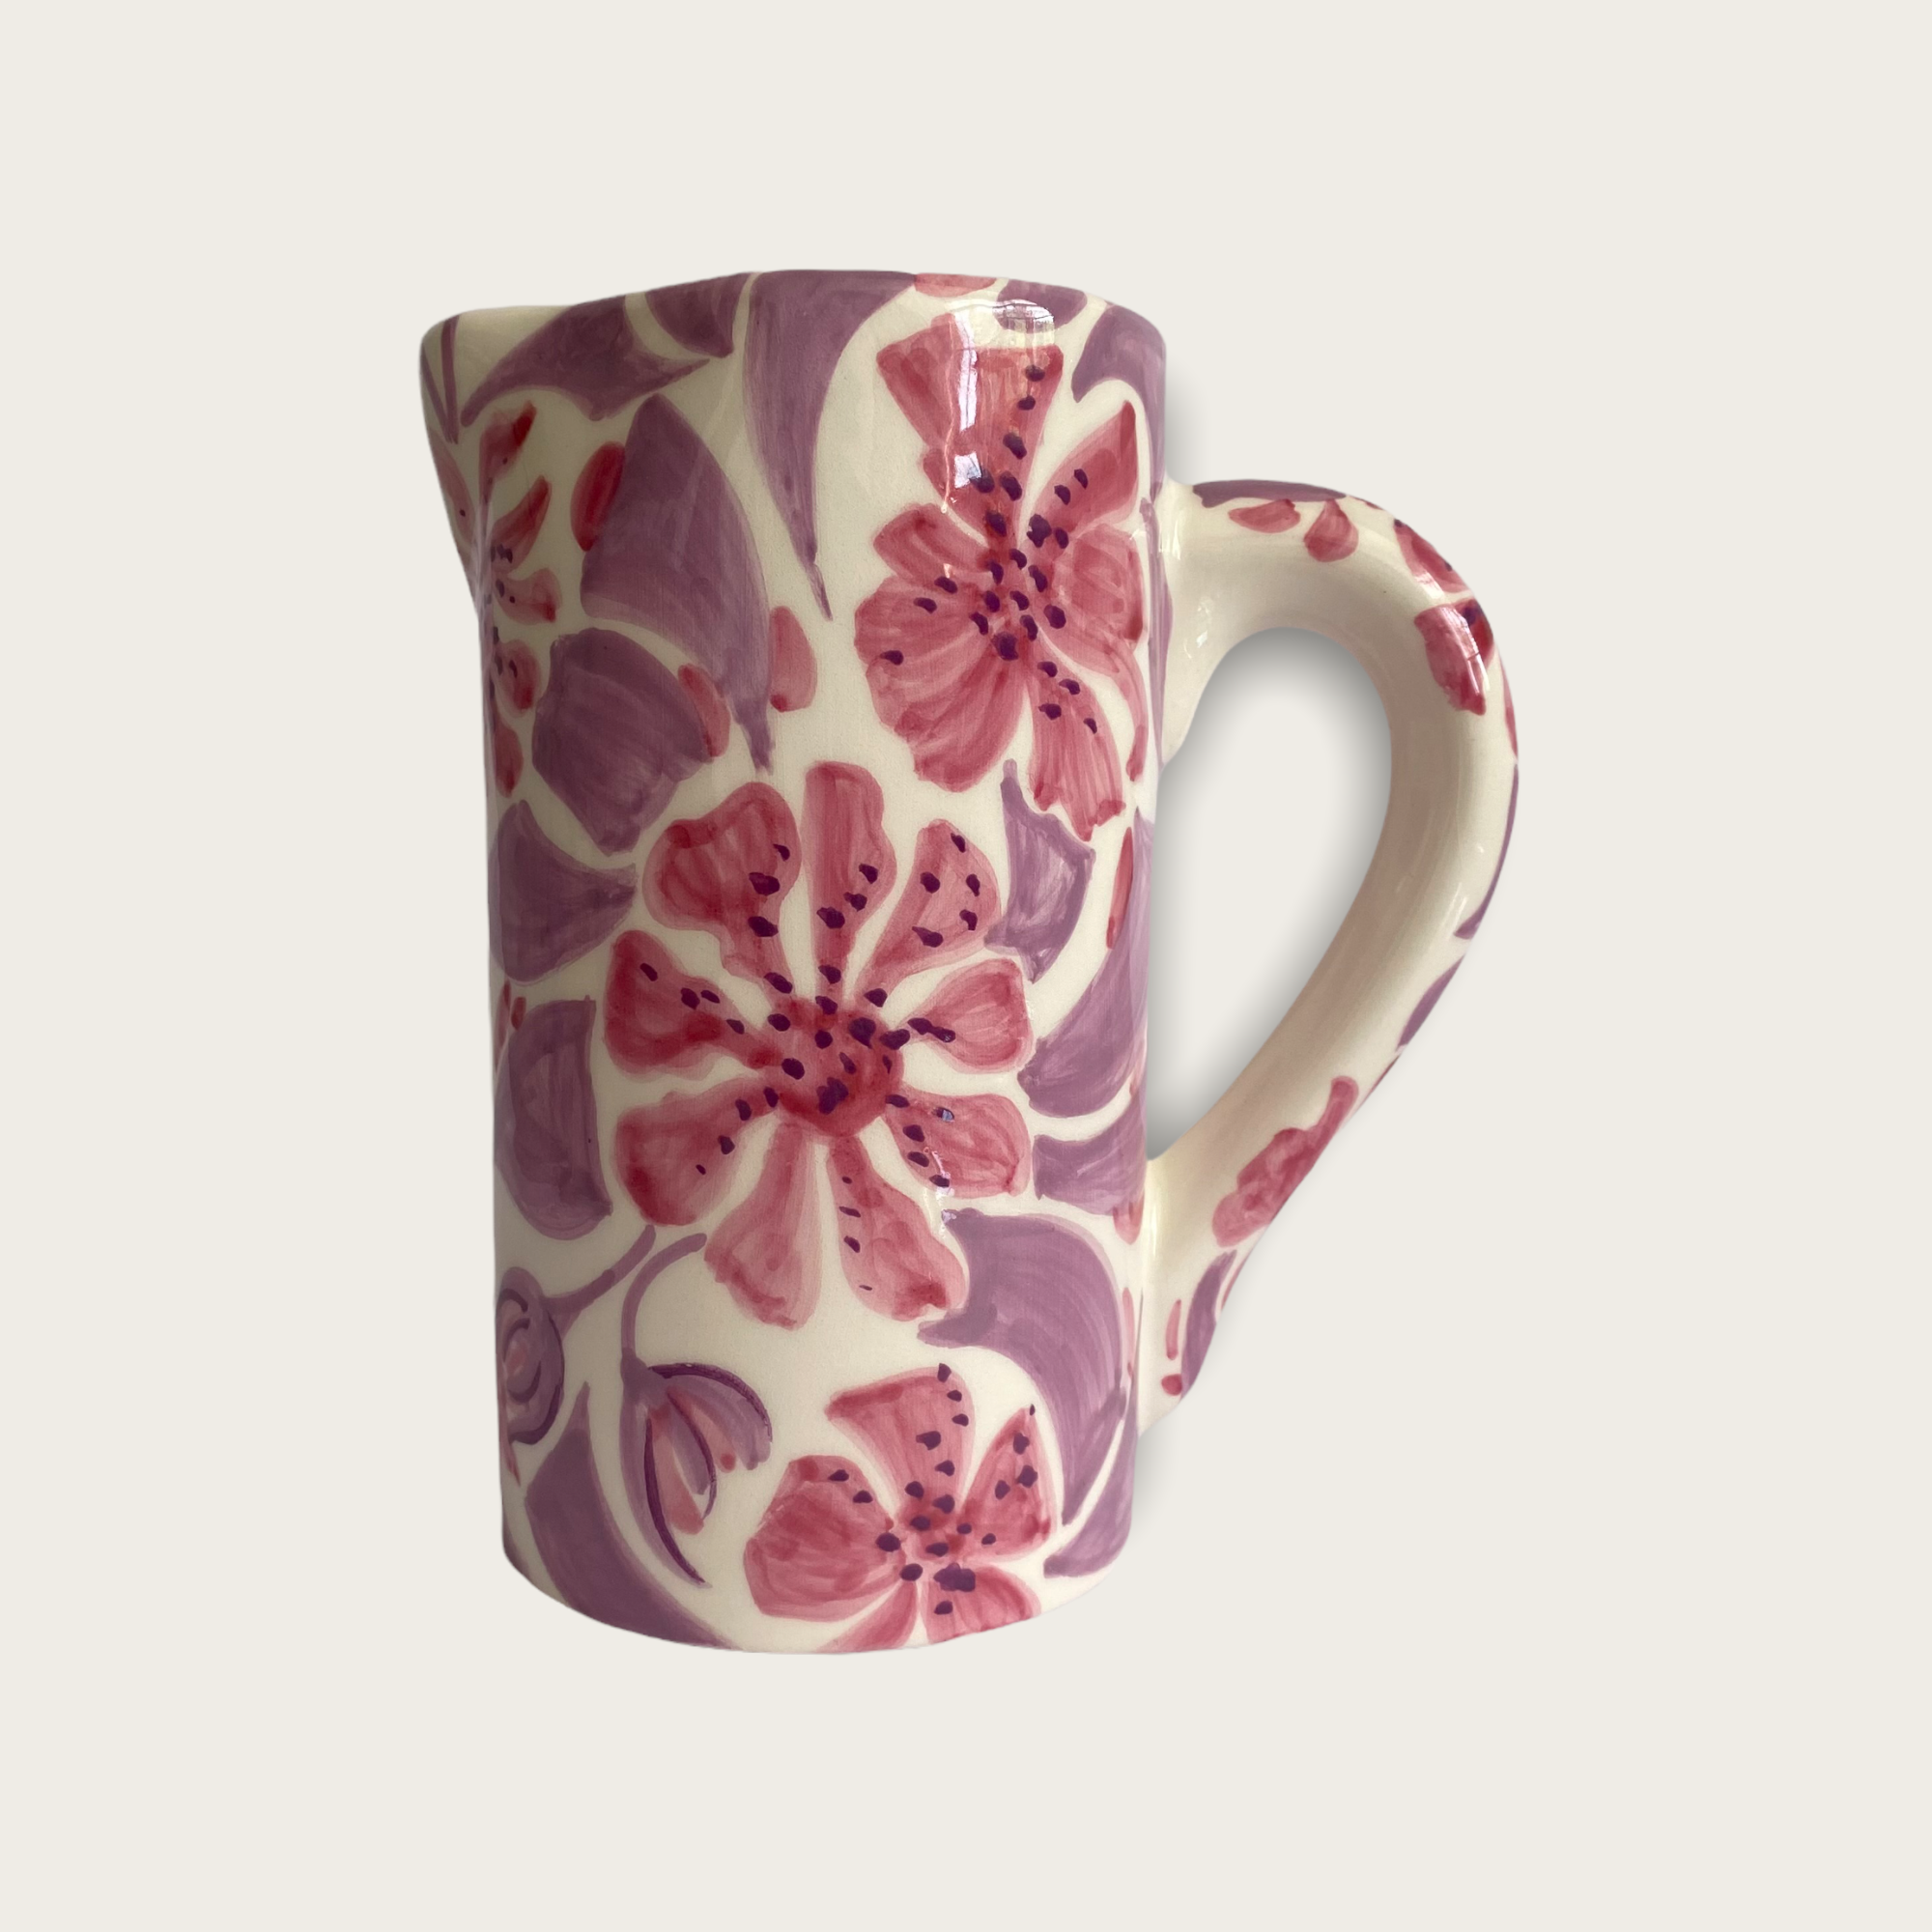 A ceramin jug or vase the has a spout and a handle. It is white with pink flowers and a lilac coloured pattern around the flowers. 